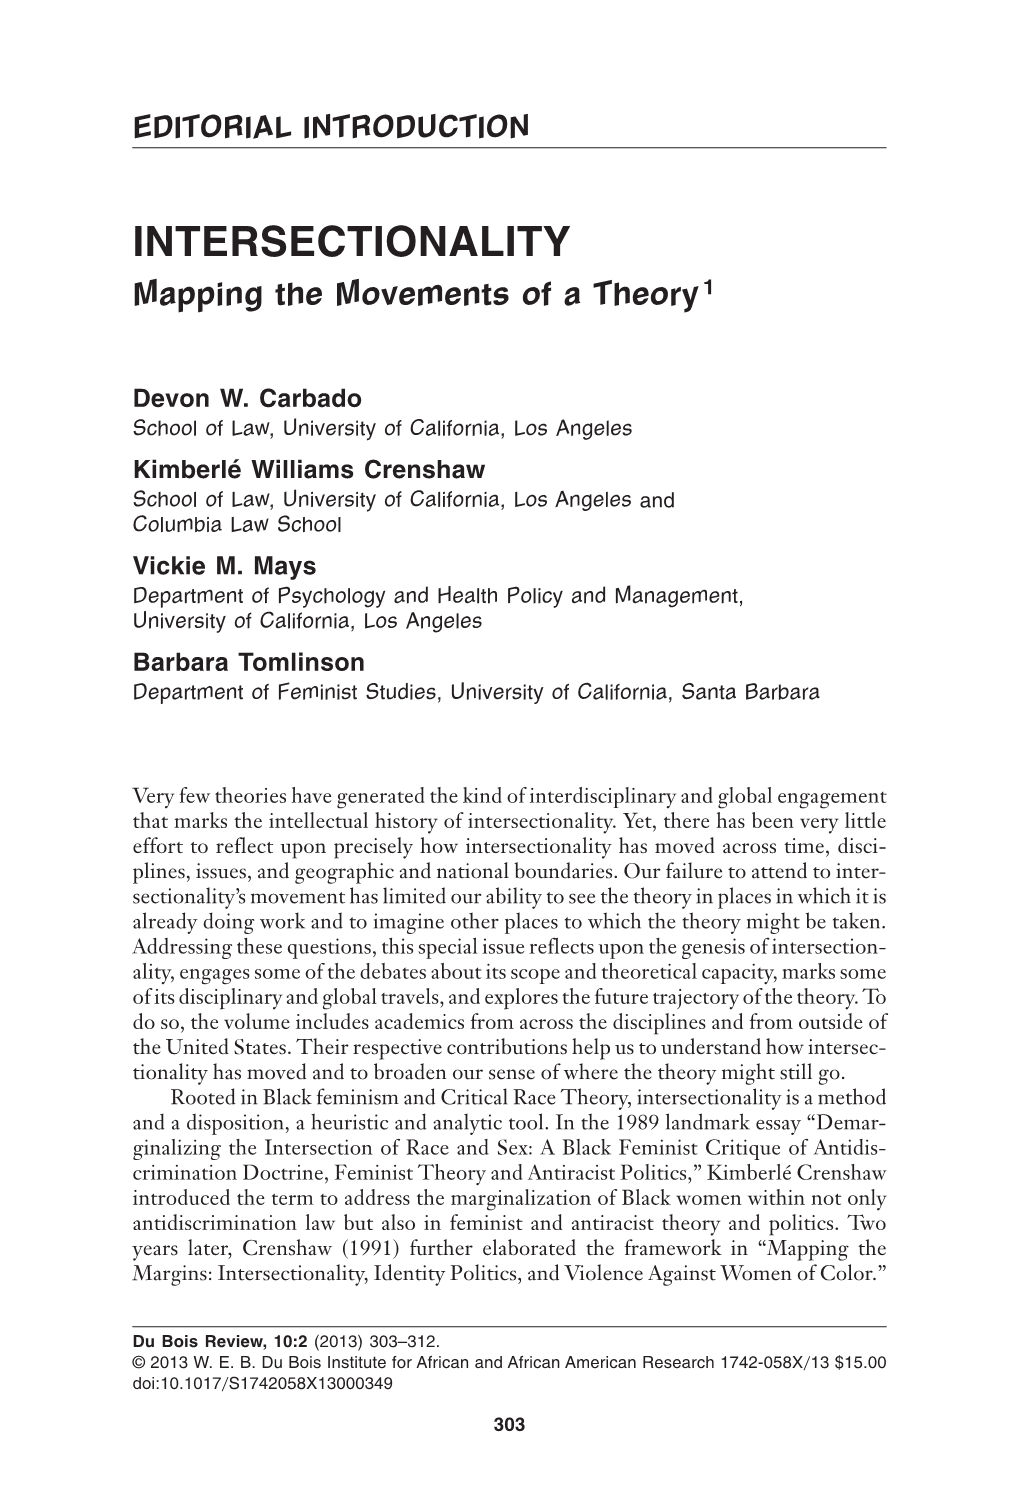 Intersectionality: Mapping the Movements of a Theory